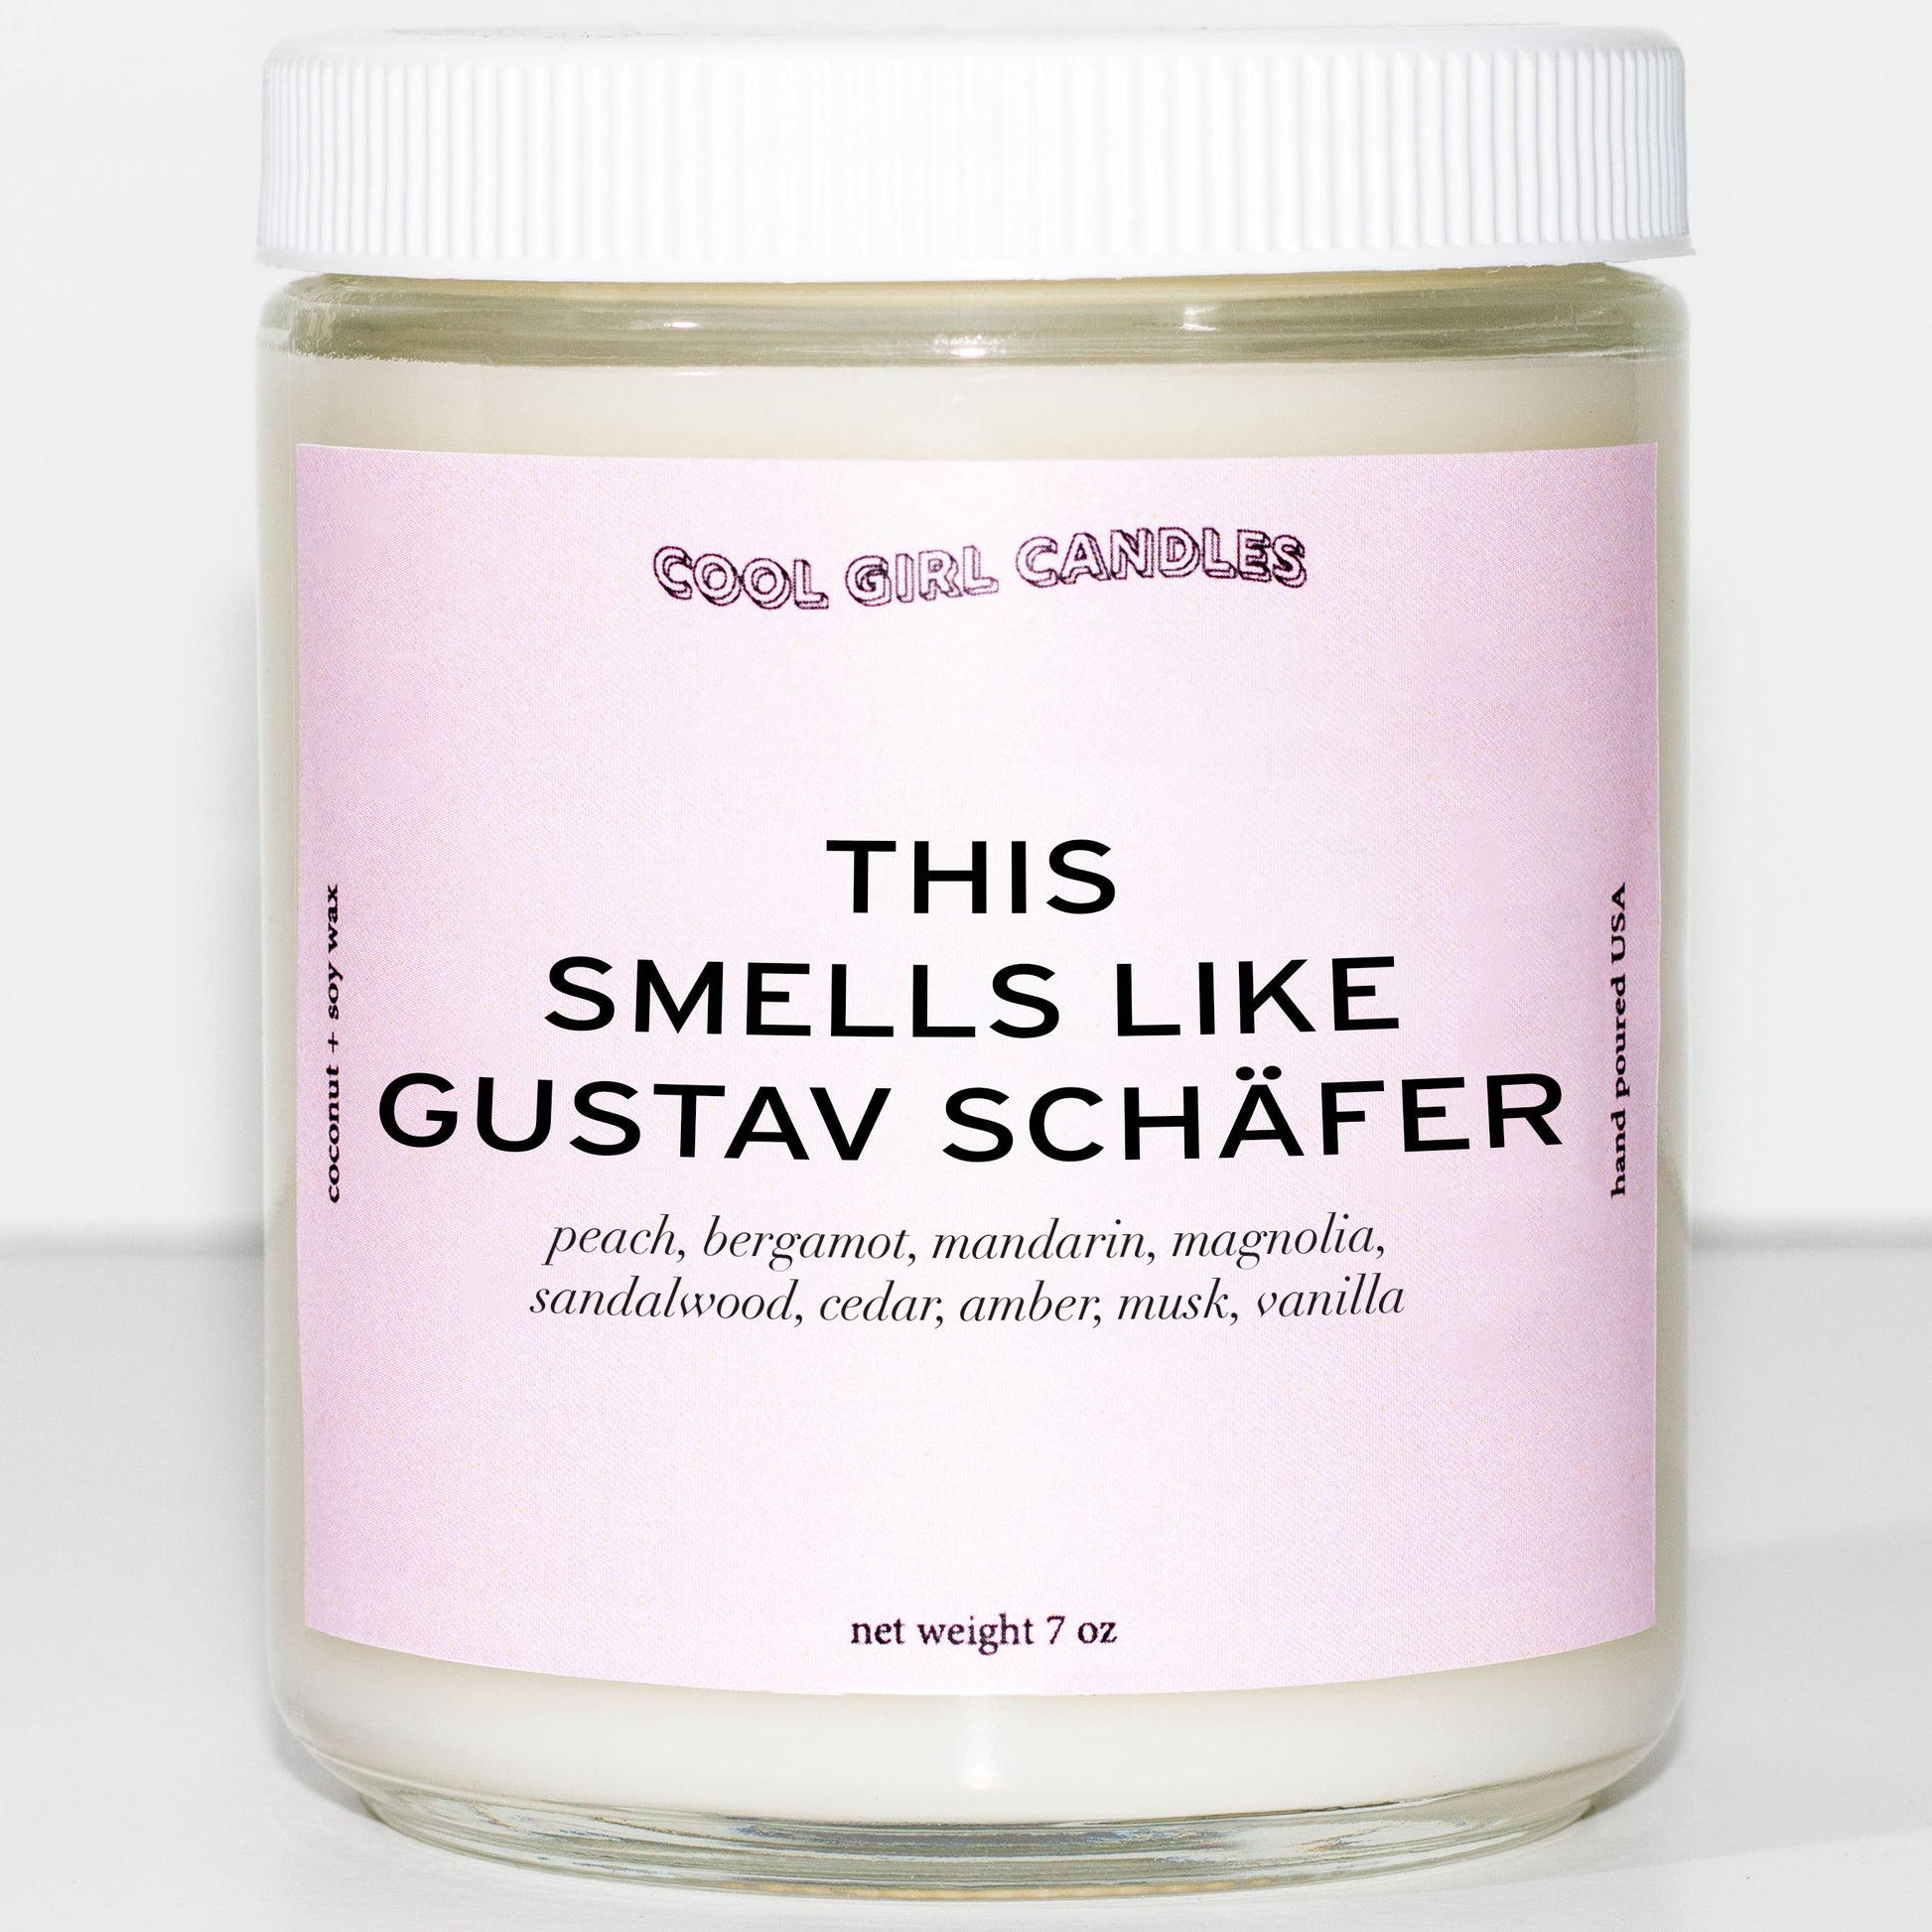 This smells like Gustav Schafer candle for Tokio Hotel fans from Cool Girl Candles